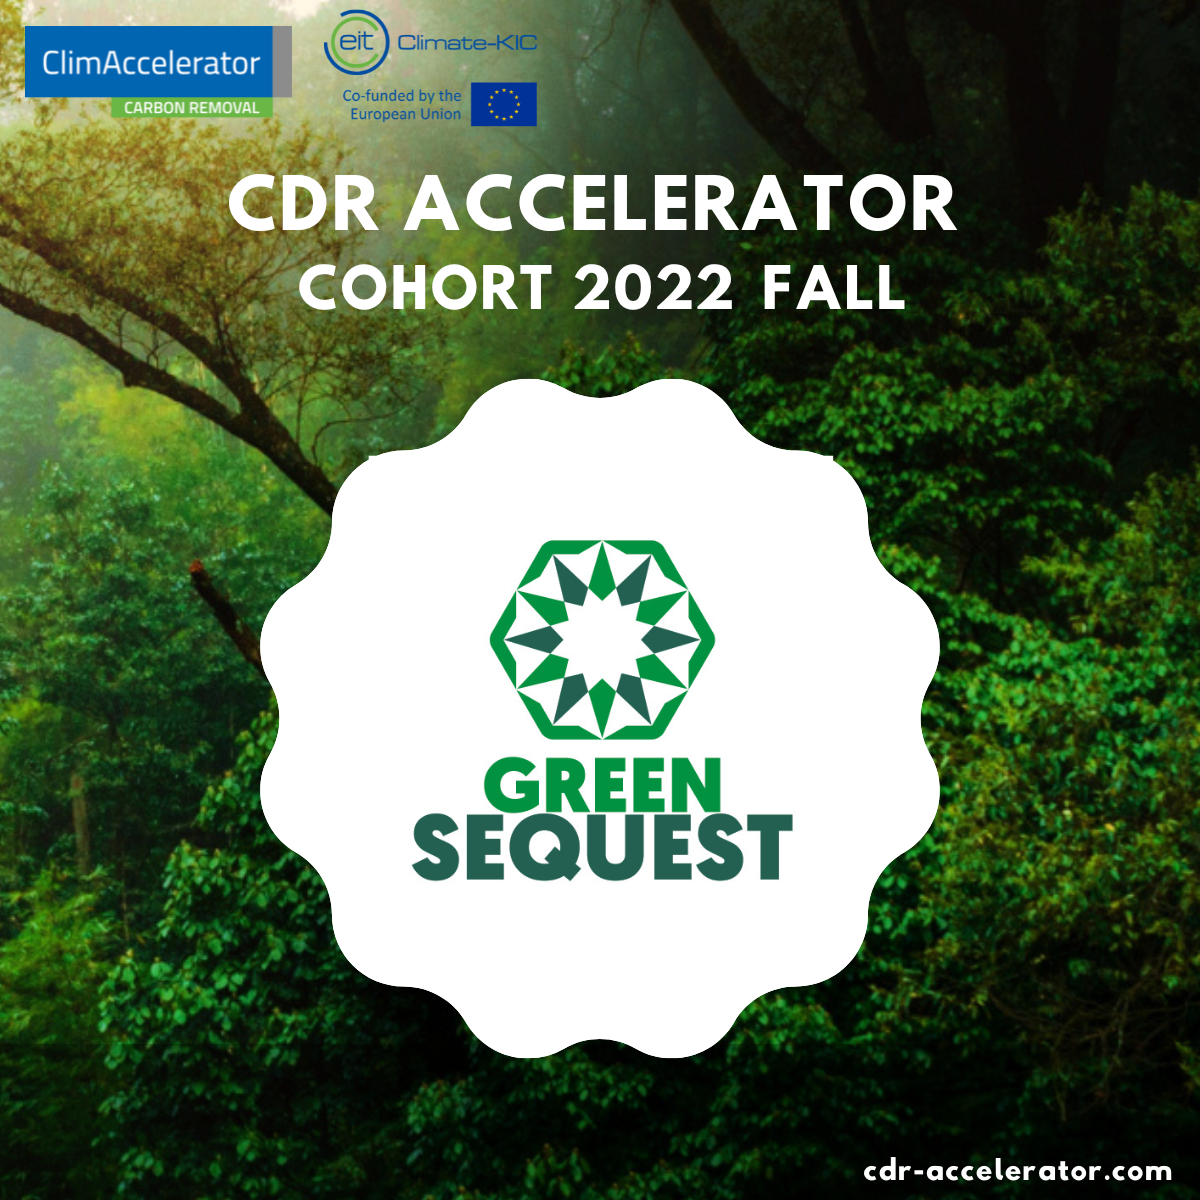 Green Sequest selected to join Carbon Removal ClimAccelerator